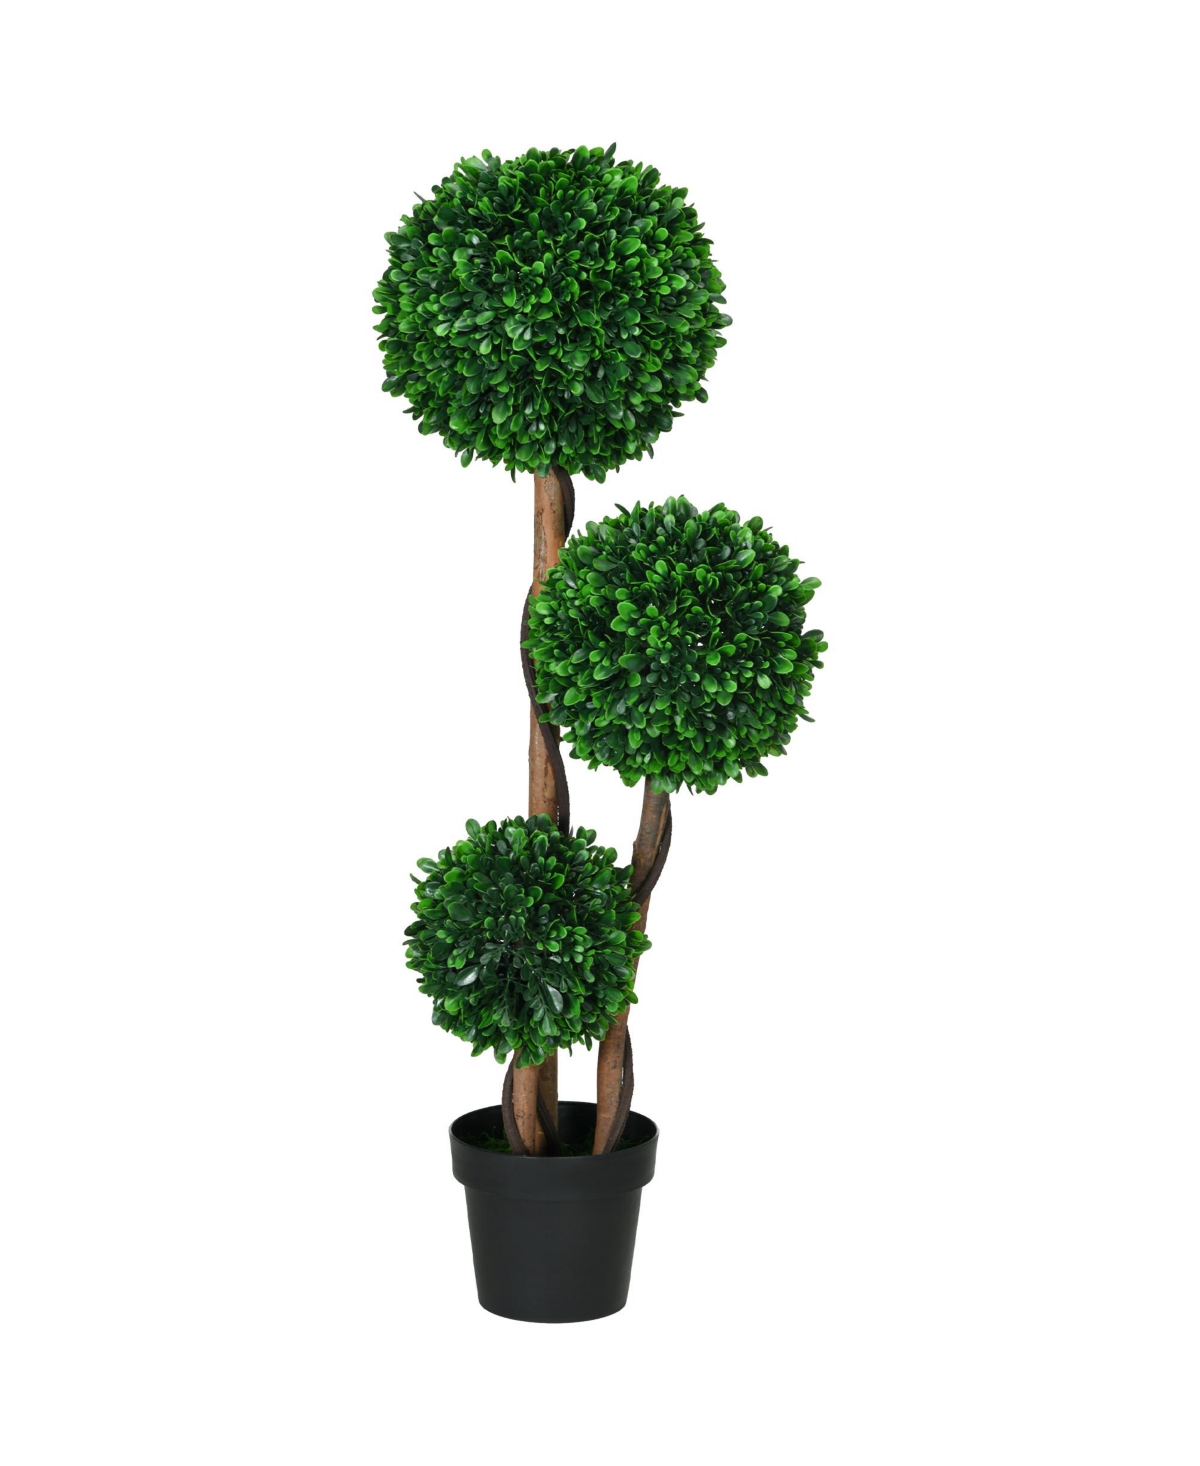 3.5' Artificial Tree, Three Ball Boxwood Topiary for Indoor Outdoor - Green